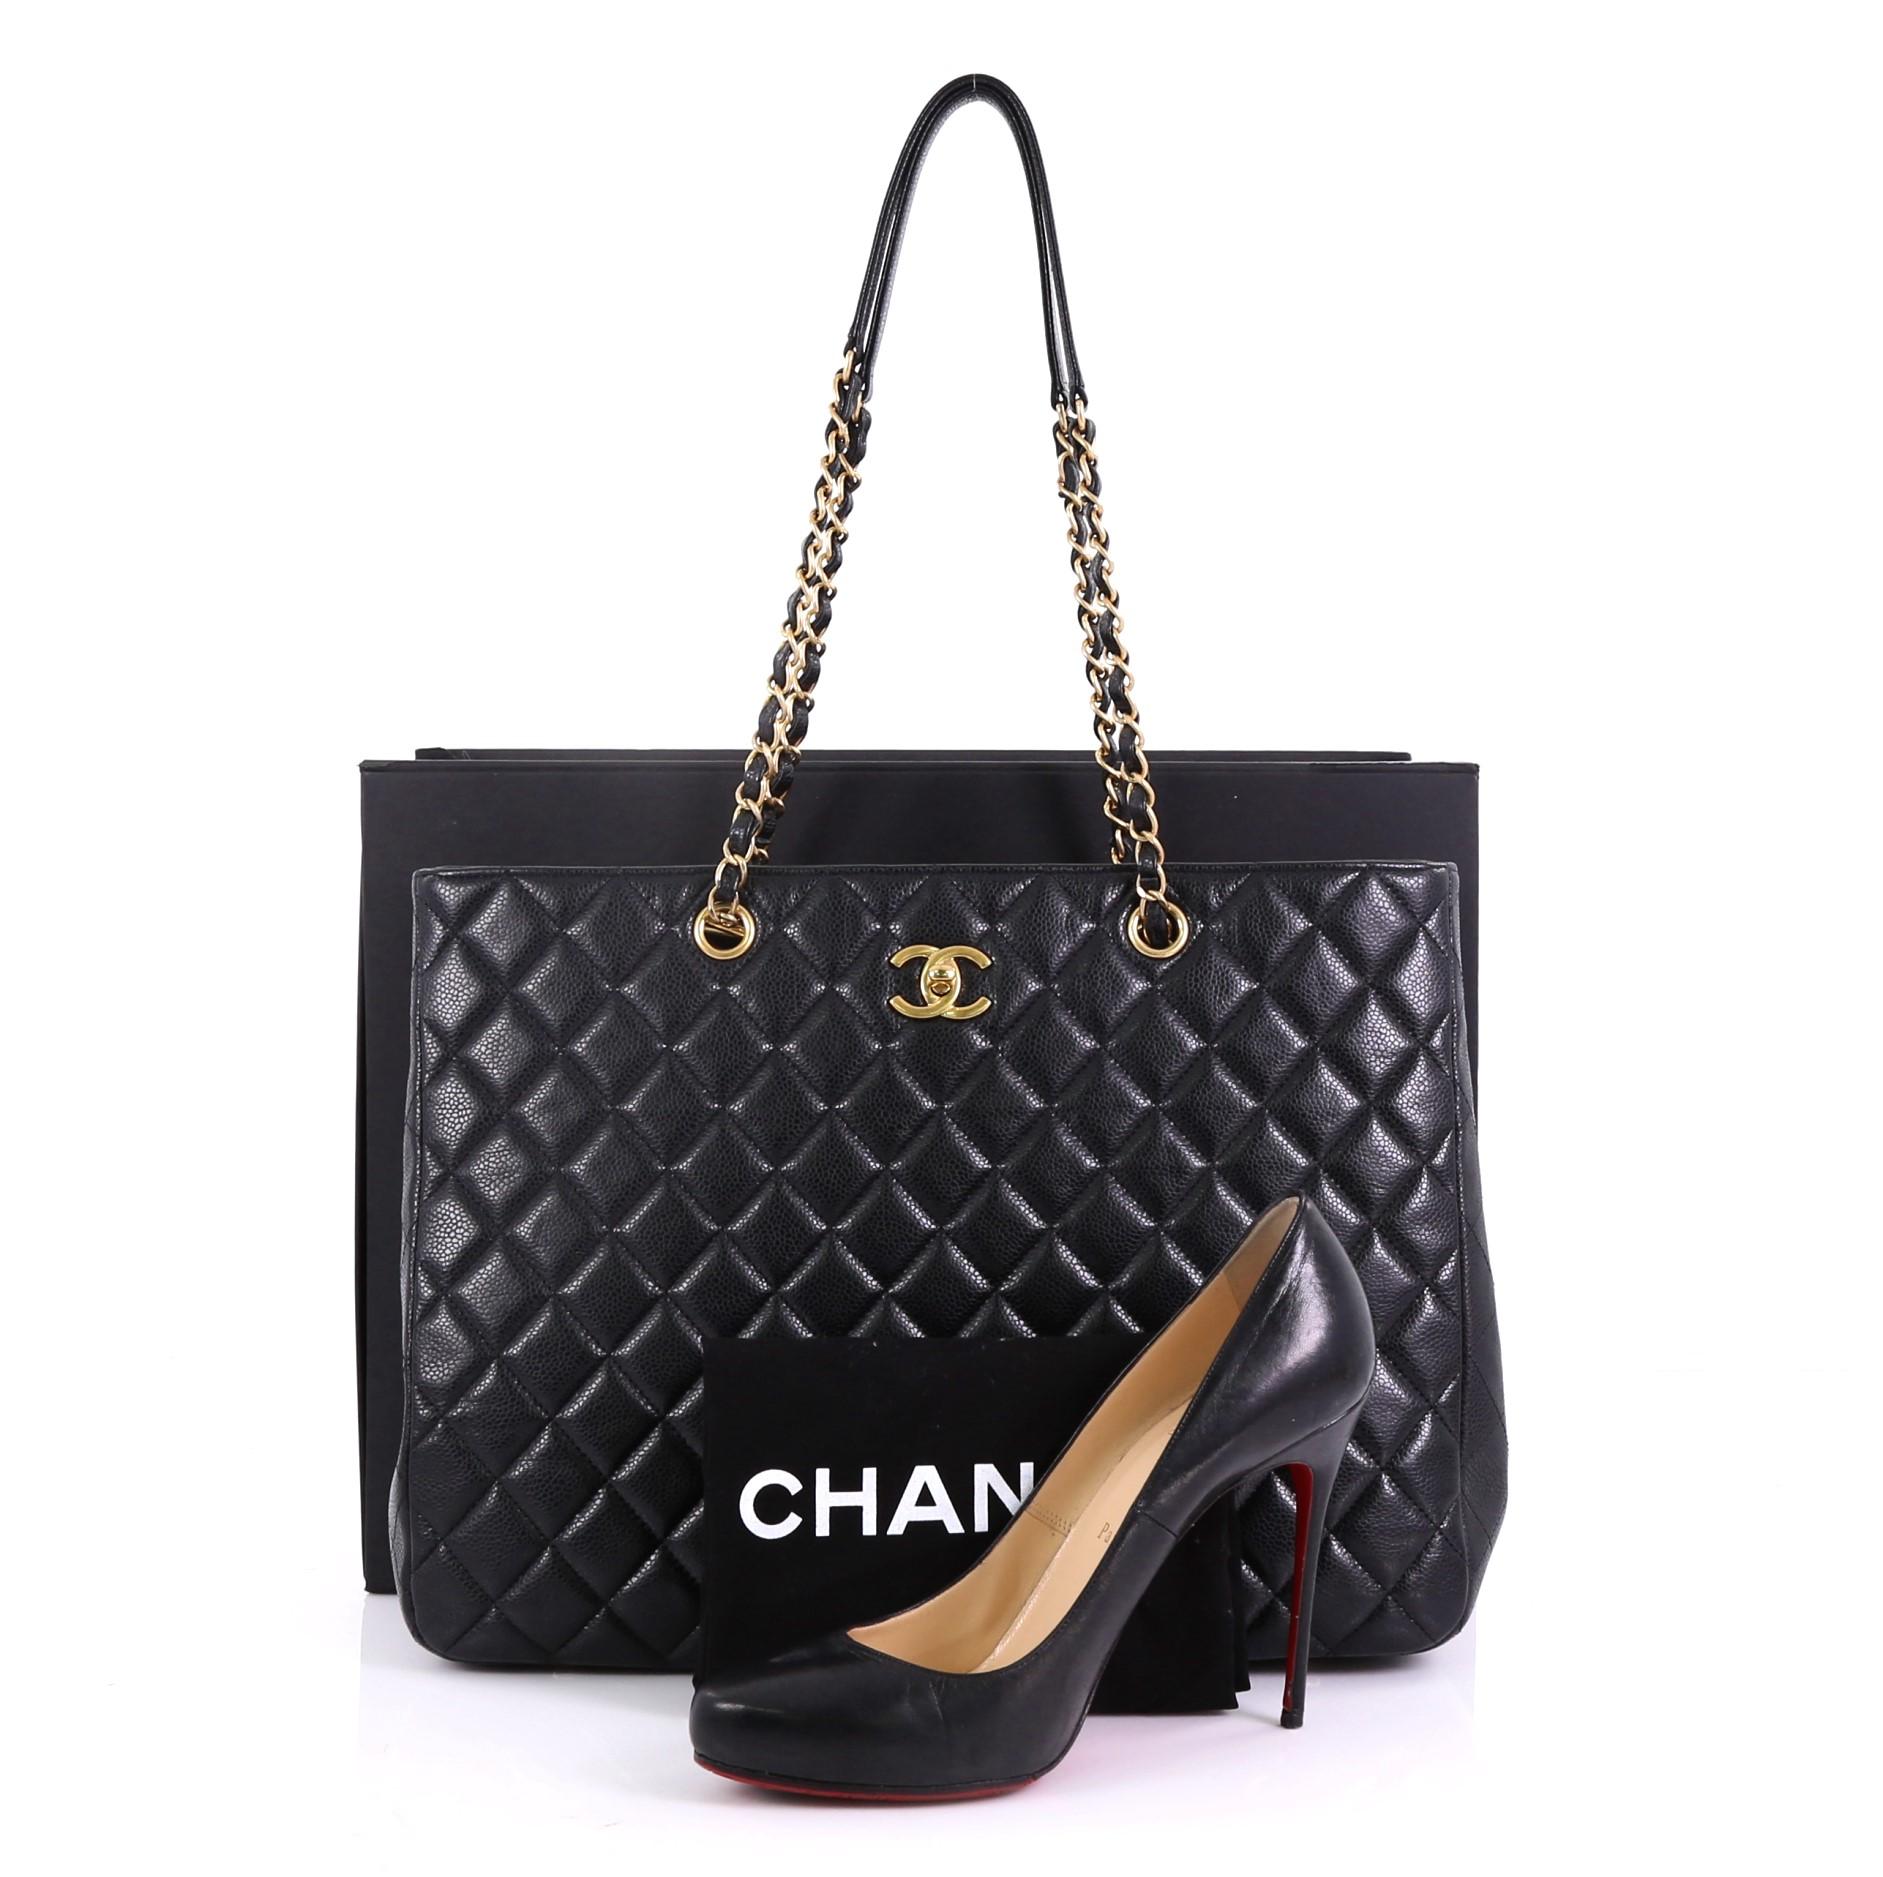 This Chanel Classic CC Shopping Tote Quilted Caviar Large, crafted in black quilted caviar leather, features dual woven in leather chain straps with leather pads, protective base studs, and gold-tone hardware. Its CC turn-lock closure opens to a